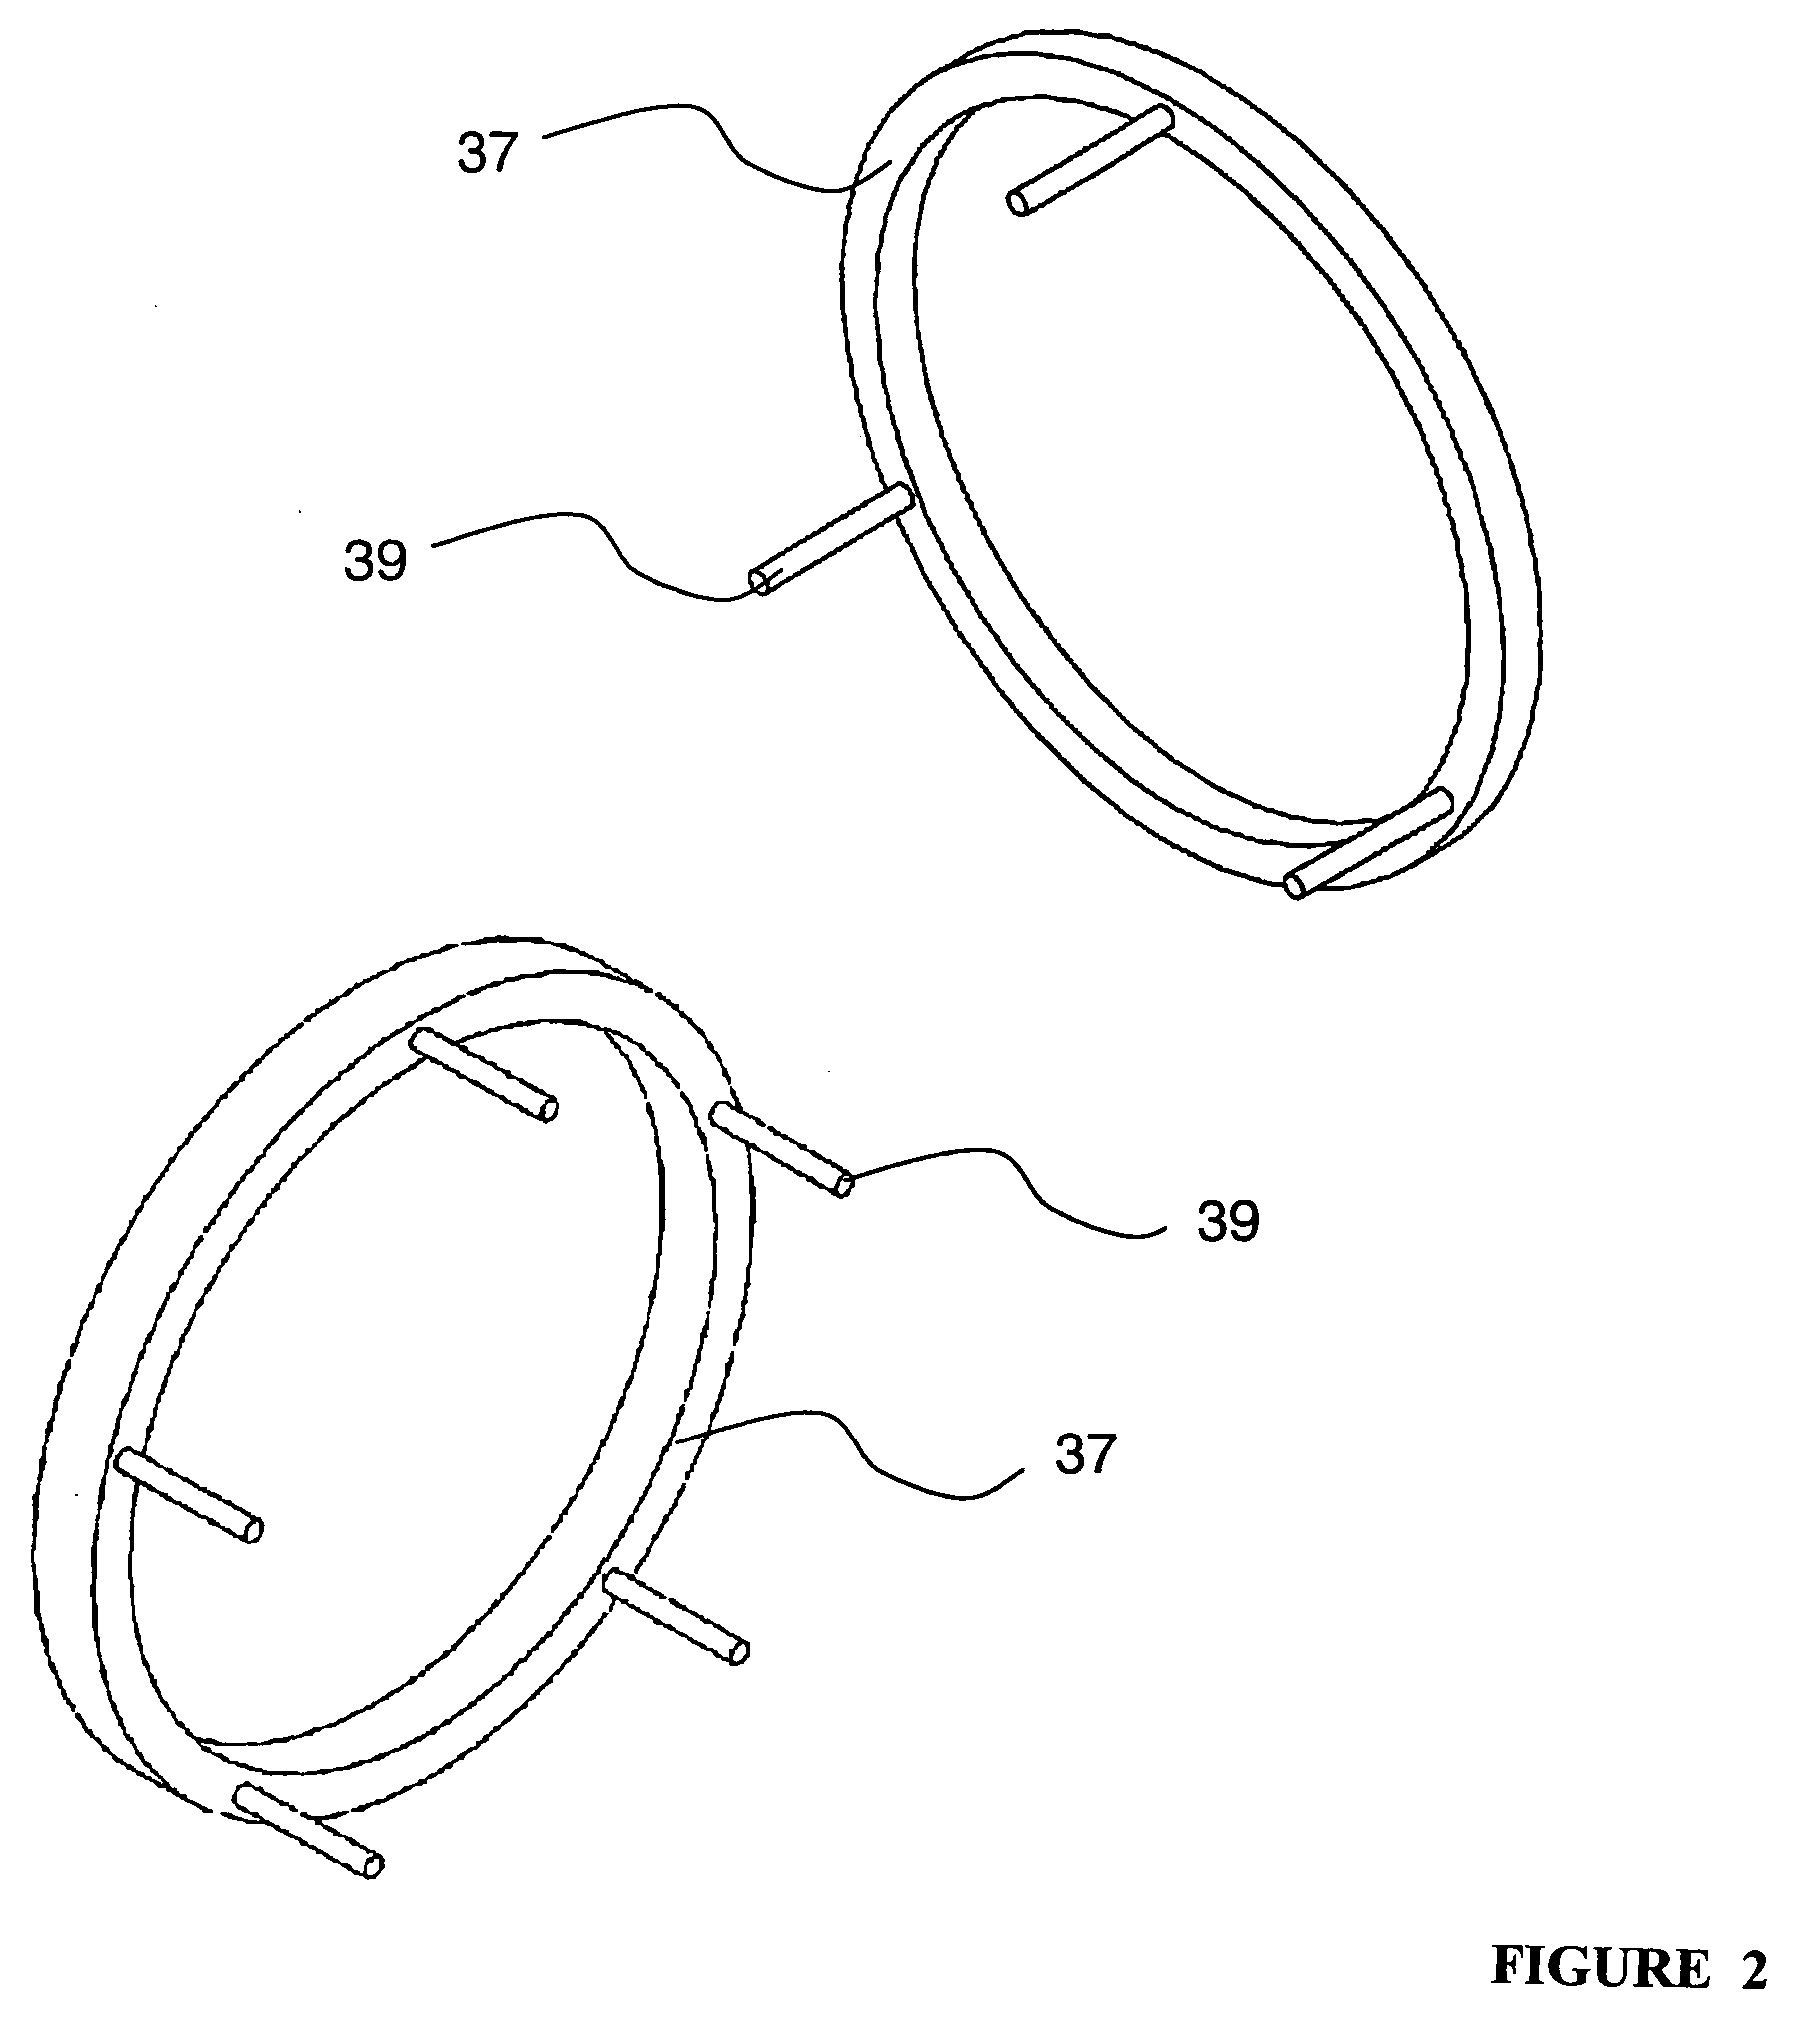 Microscope objective with axially adjustable correction mounts